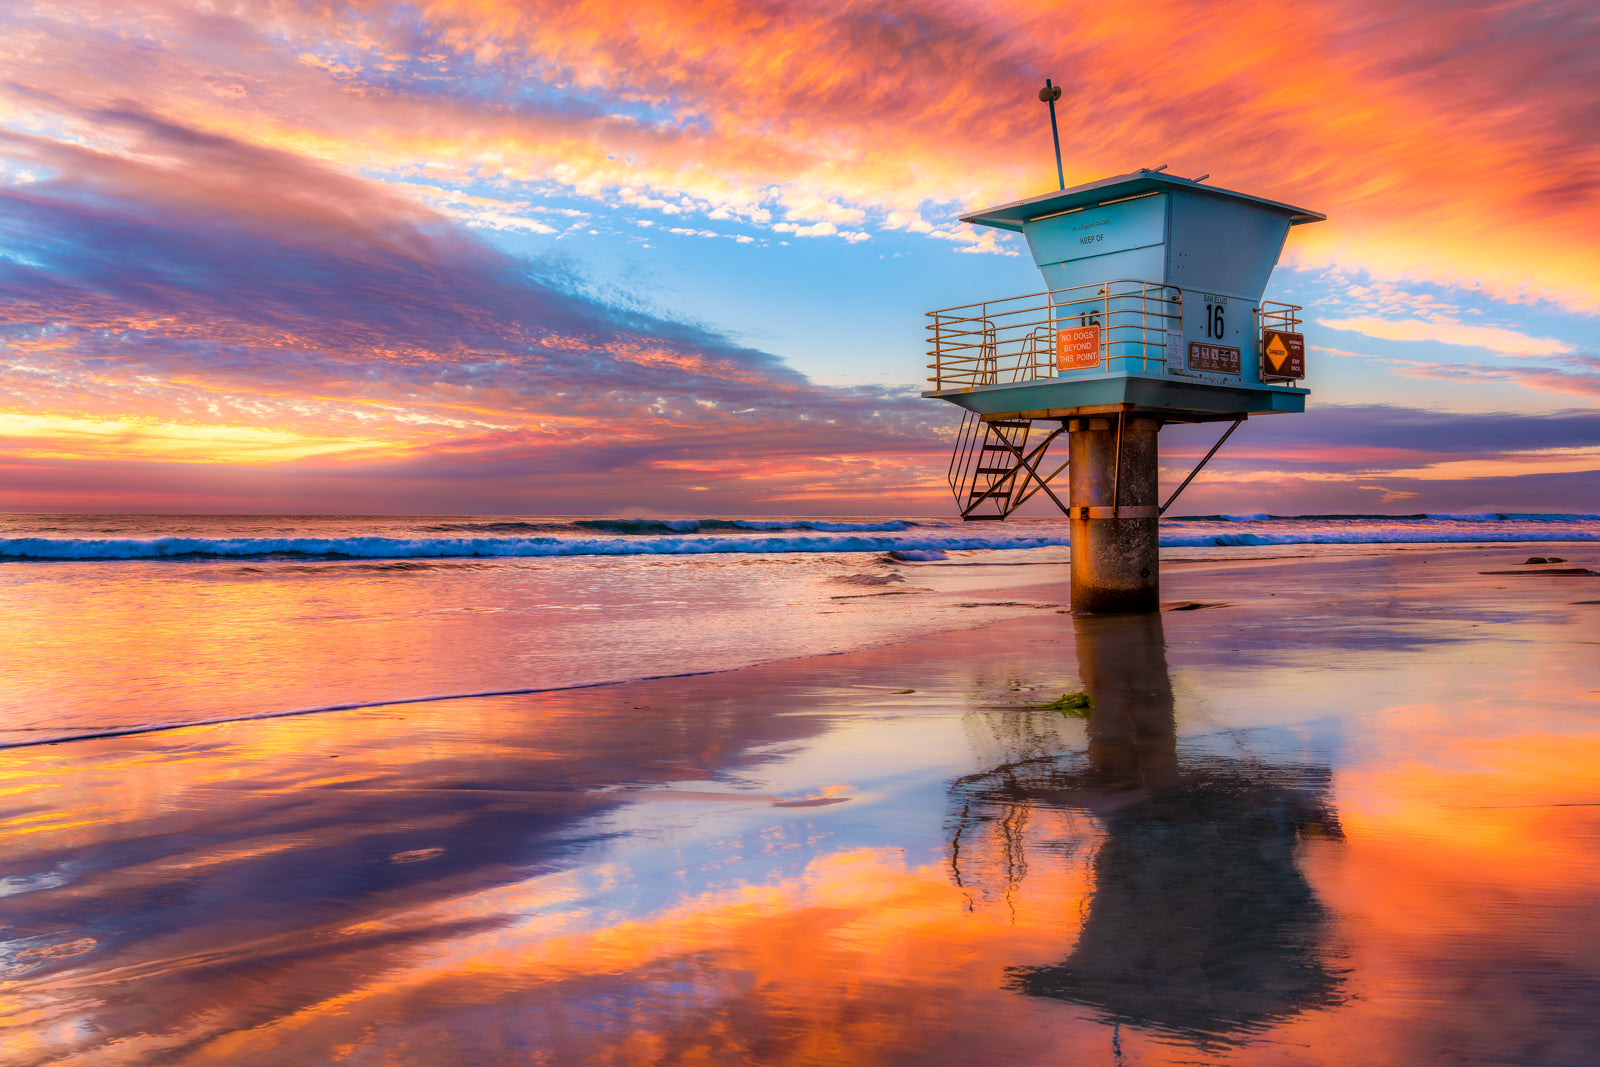 “Fire Sky" Cardiff by the Sea in Encinitas, CA